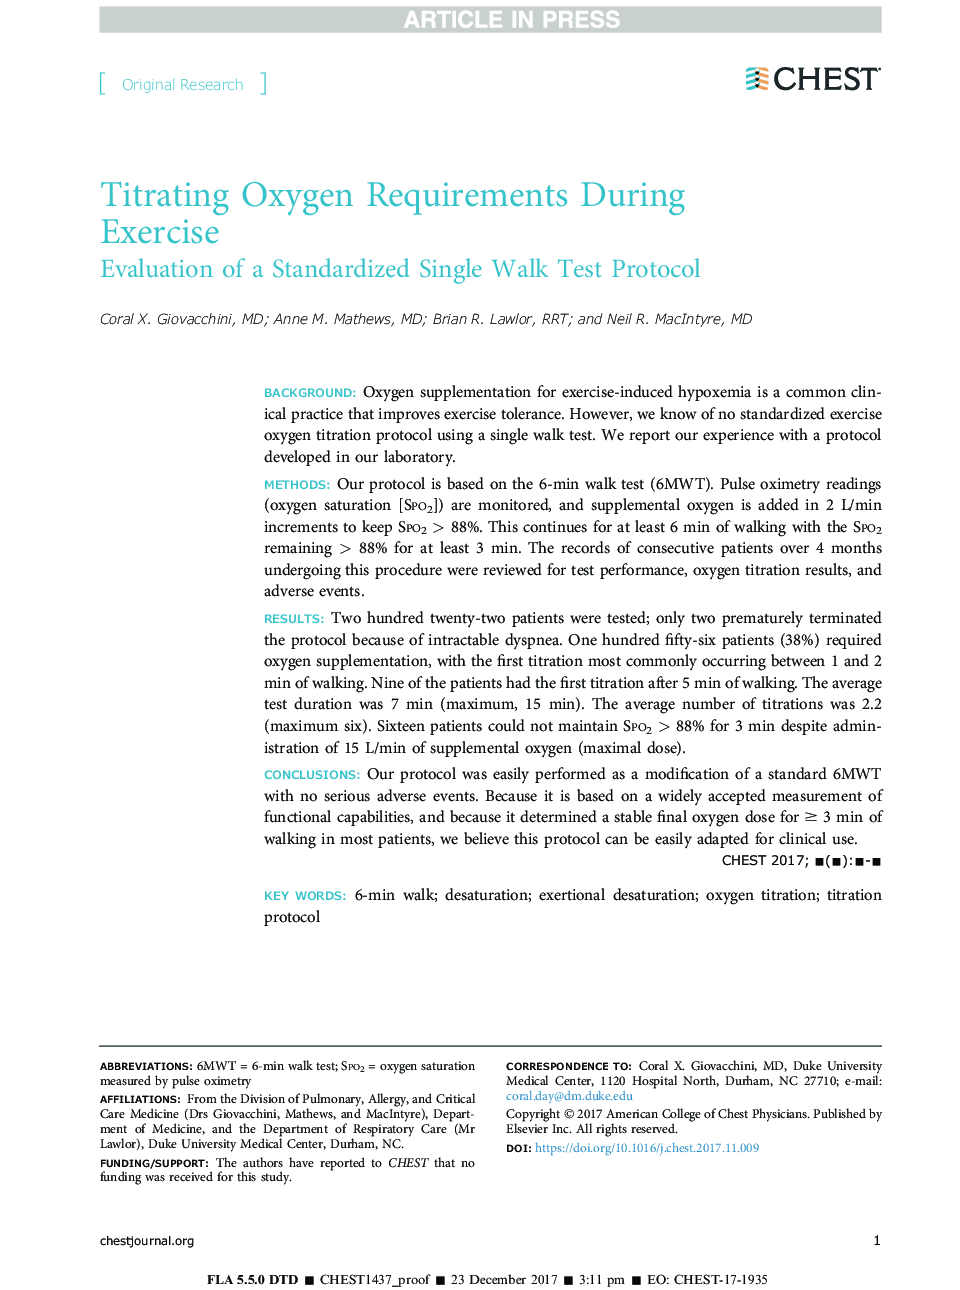 Titrating Oxygen Requirements During Exercise